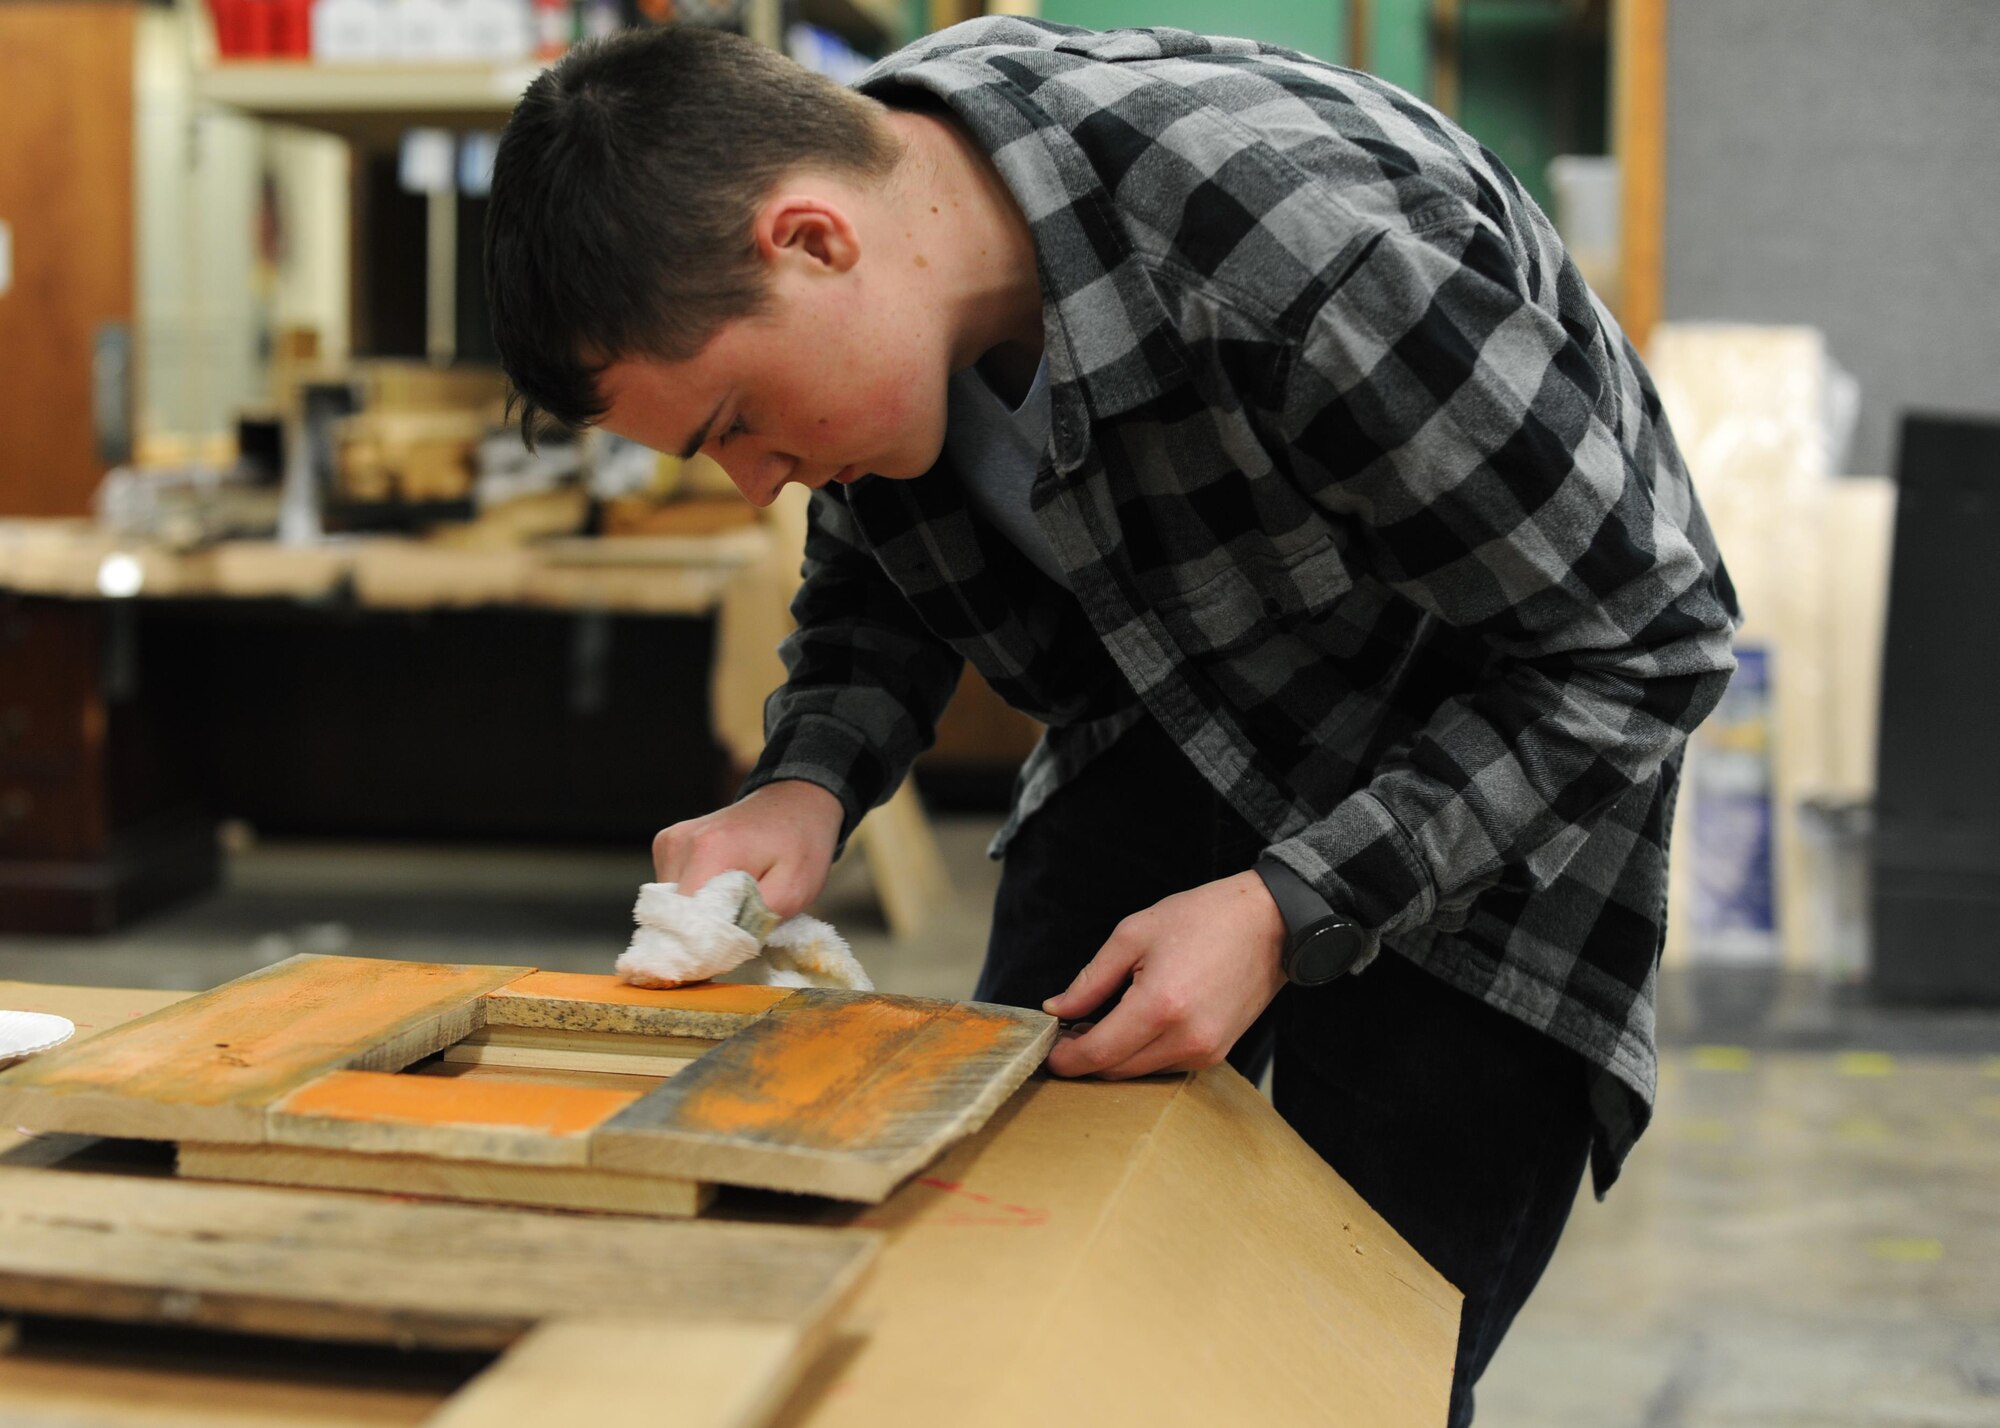 U.S. Air Force Airman 1st Class Alexander Ross, 19th Aircraft Maintenance Squadron Integrated Flight Control Systems apprentice, uses a rag to create an aged effect on a picture frame during a class Feb. 15, 2017, at the 19th Force Support Squadron Skills and Development Center Wood Frame Shop on Little Rock Air Force Base, Ark. The wood frame shop gives artists, hobbyists or beginners room to do more and take advantage of the equipment to create personal projects they may not be able to make in their home or dorm. (U.S. Air Force photo by Airman 1st Class Grace Nichols)